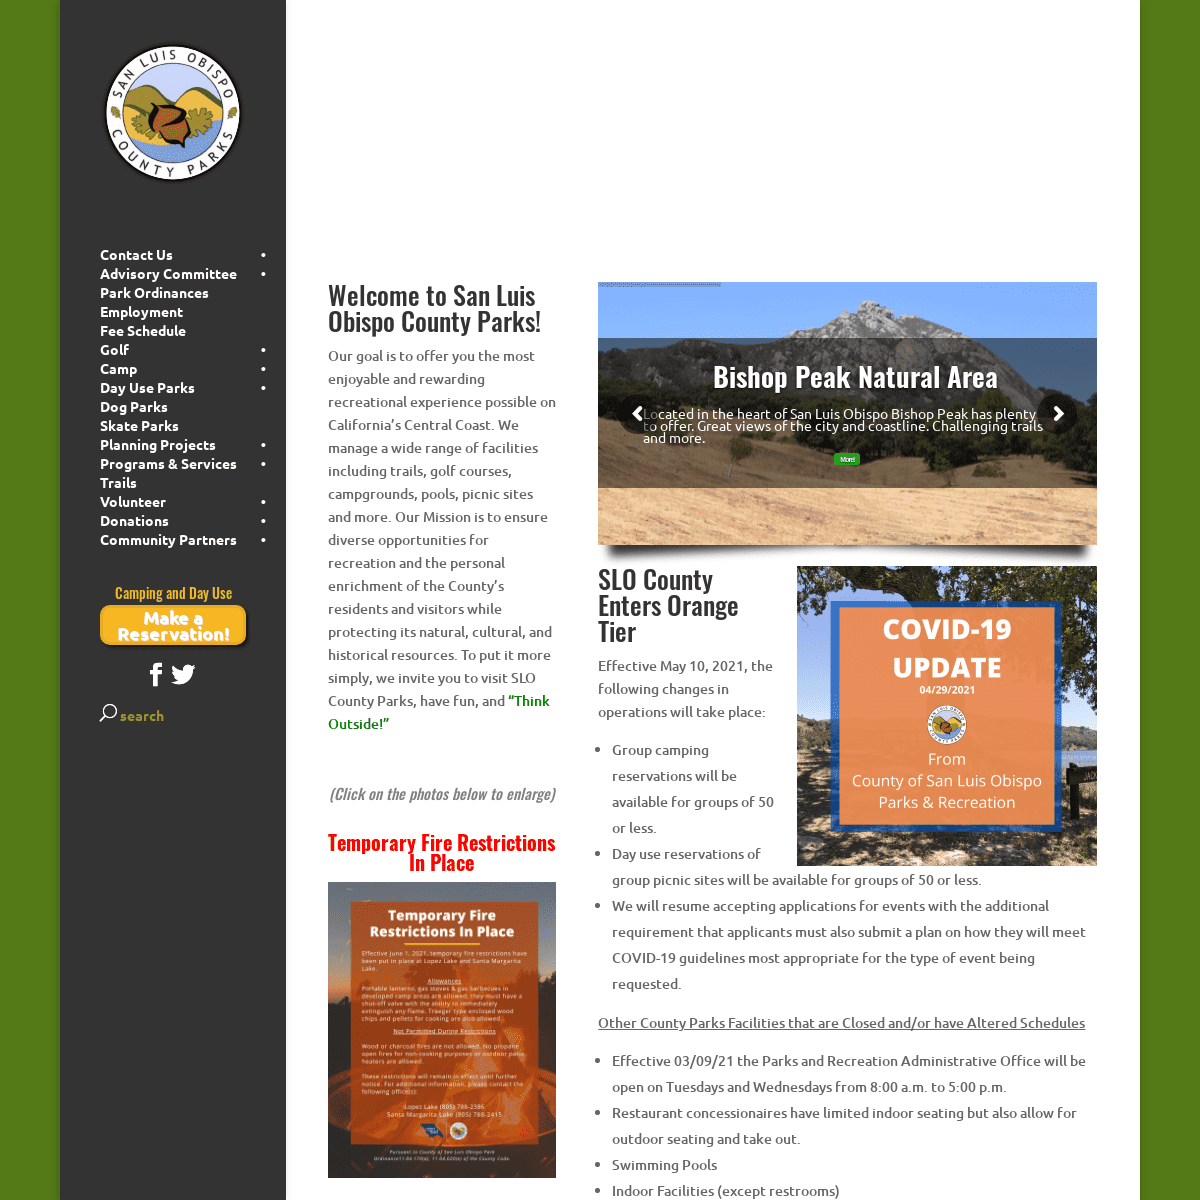 A complete backup of https://slocountyparks.com